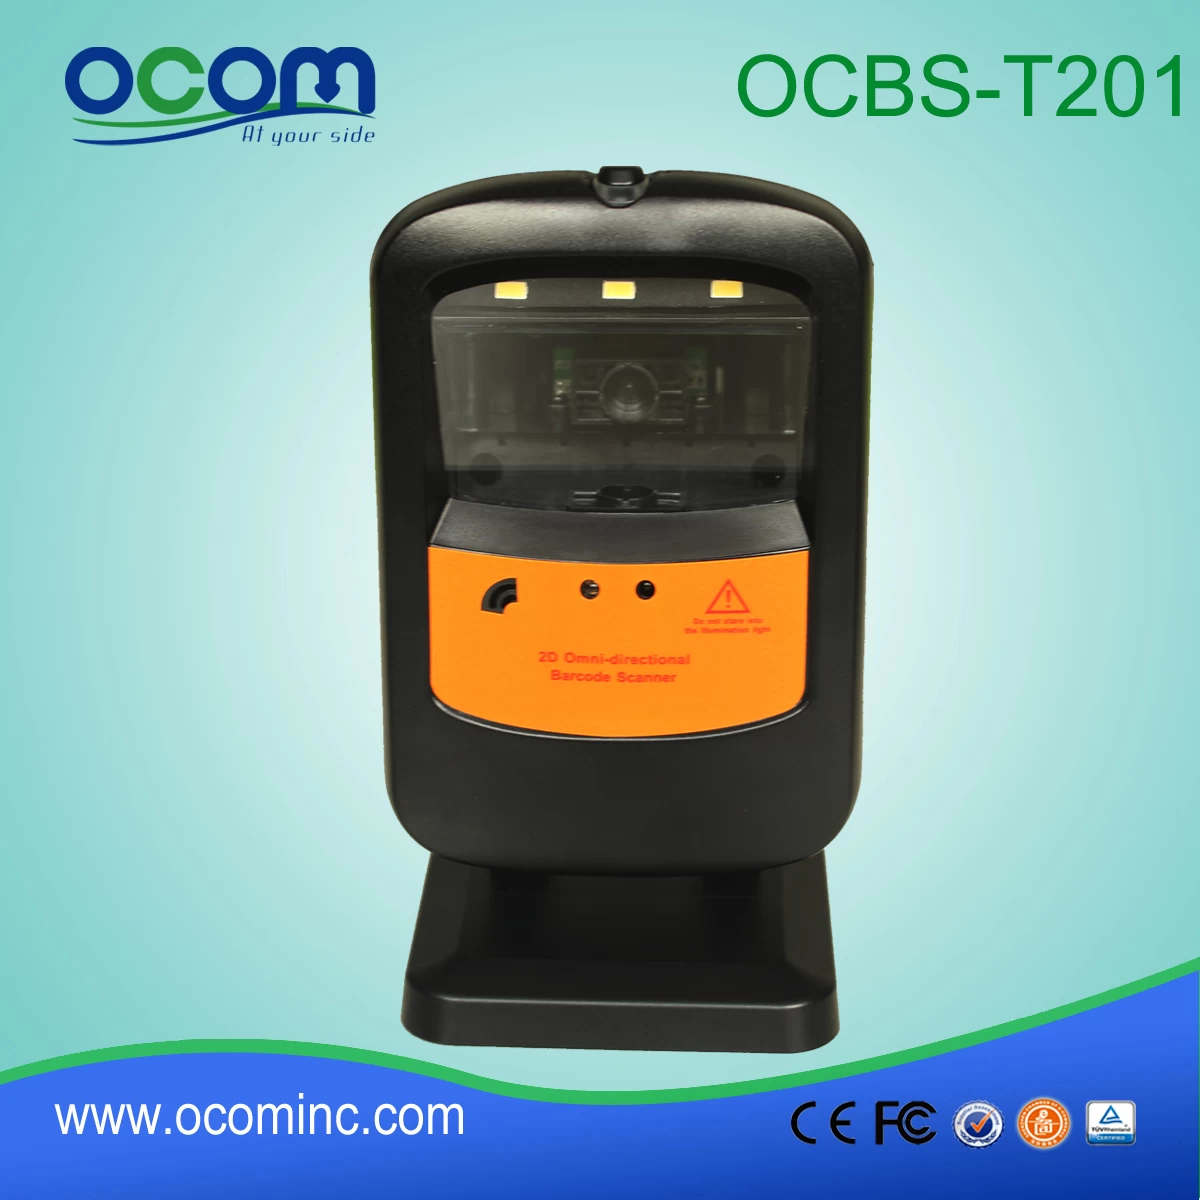 2d Omini Auto-sense barcode scanner ,Ominidirectional barcode scanner (OCBS-T201)